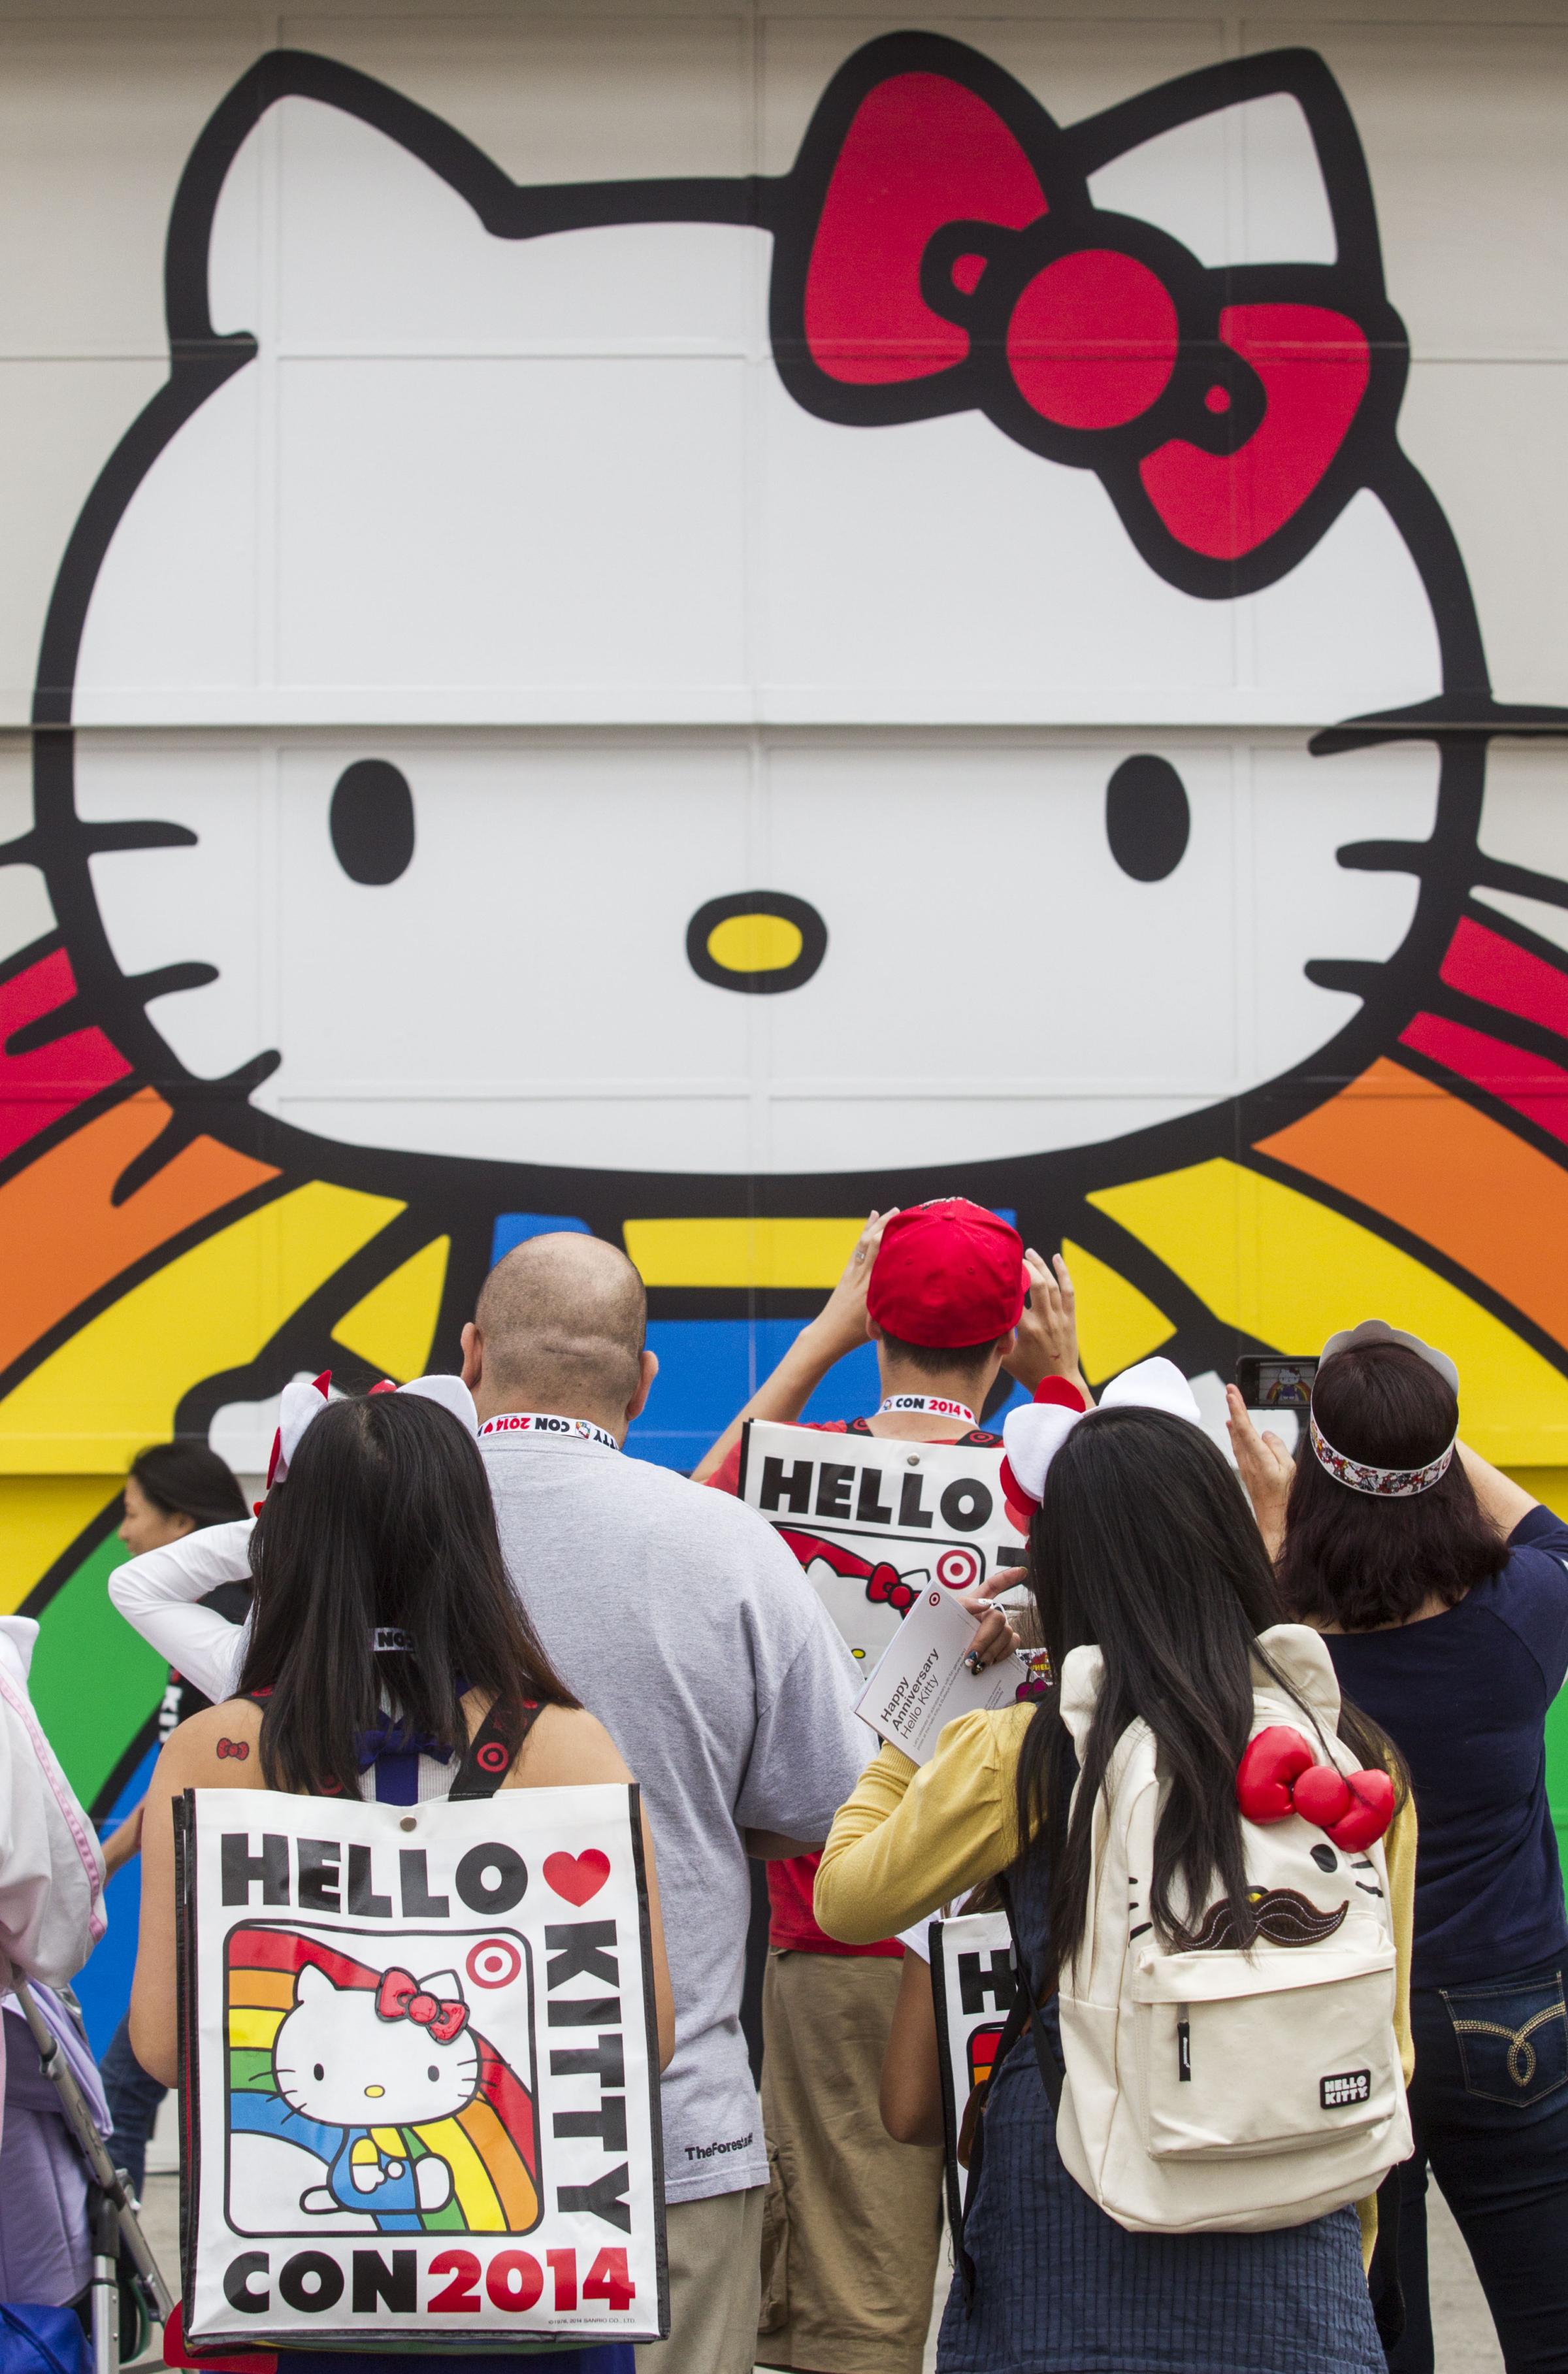 The Hello Kitty Con 2014 at the Geffen Contemporary at MOCA on Oct. 31 2014, in Los Angeles.